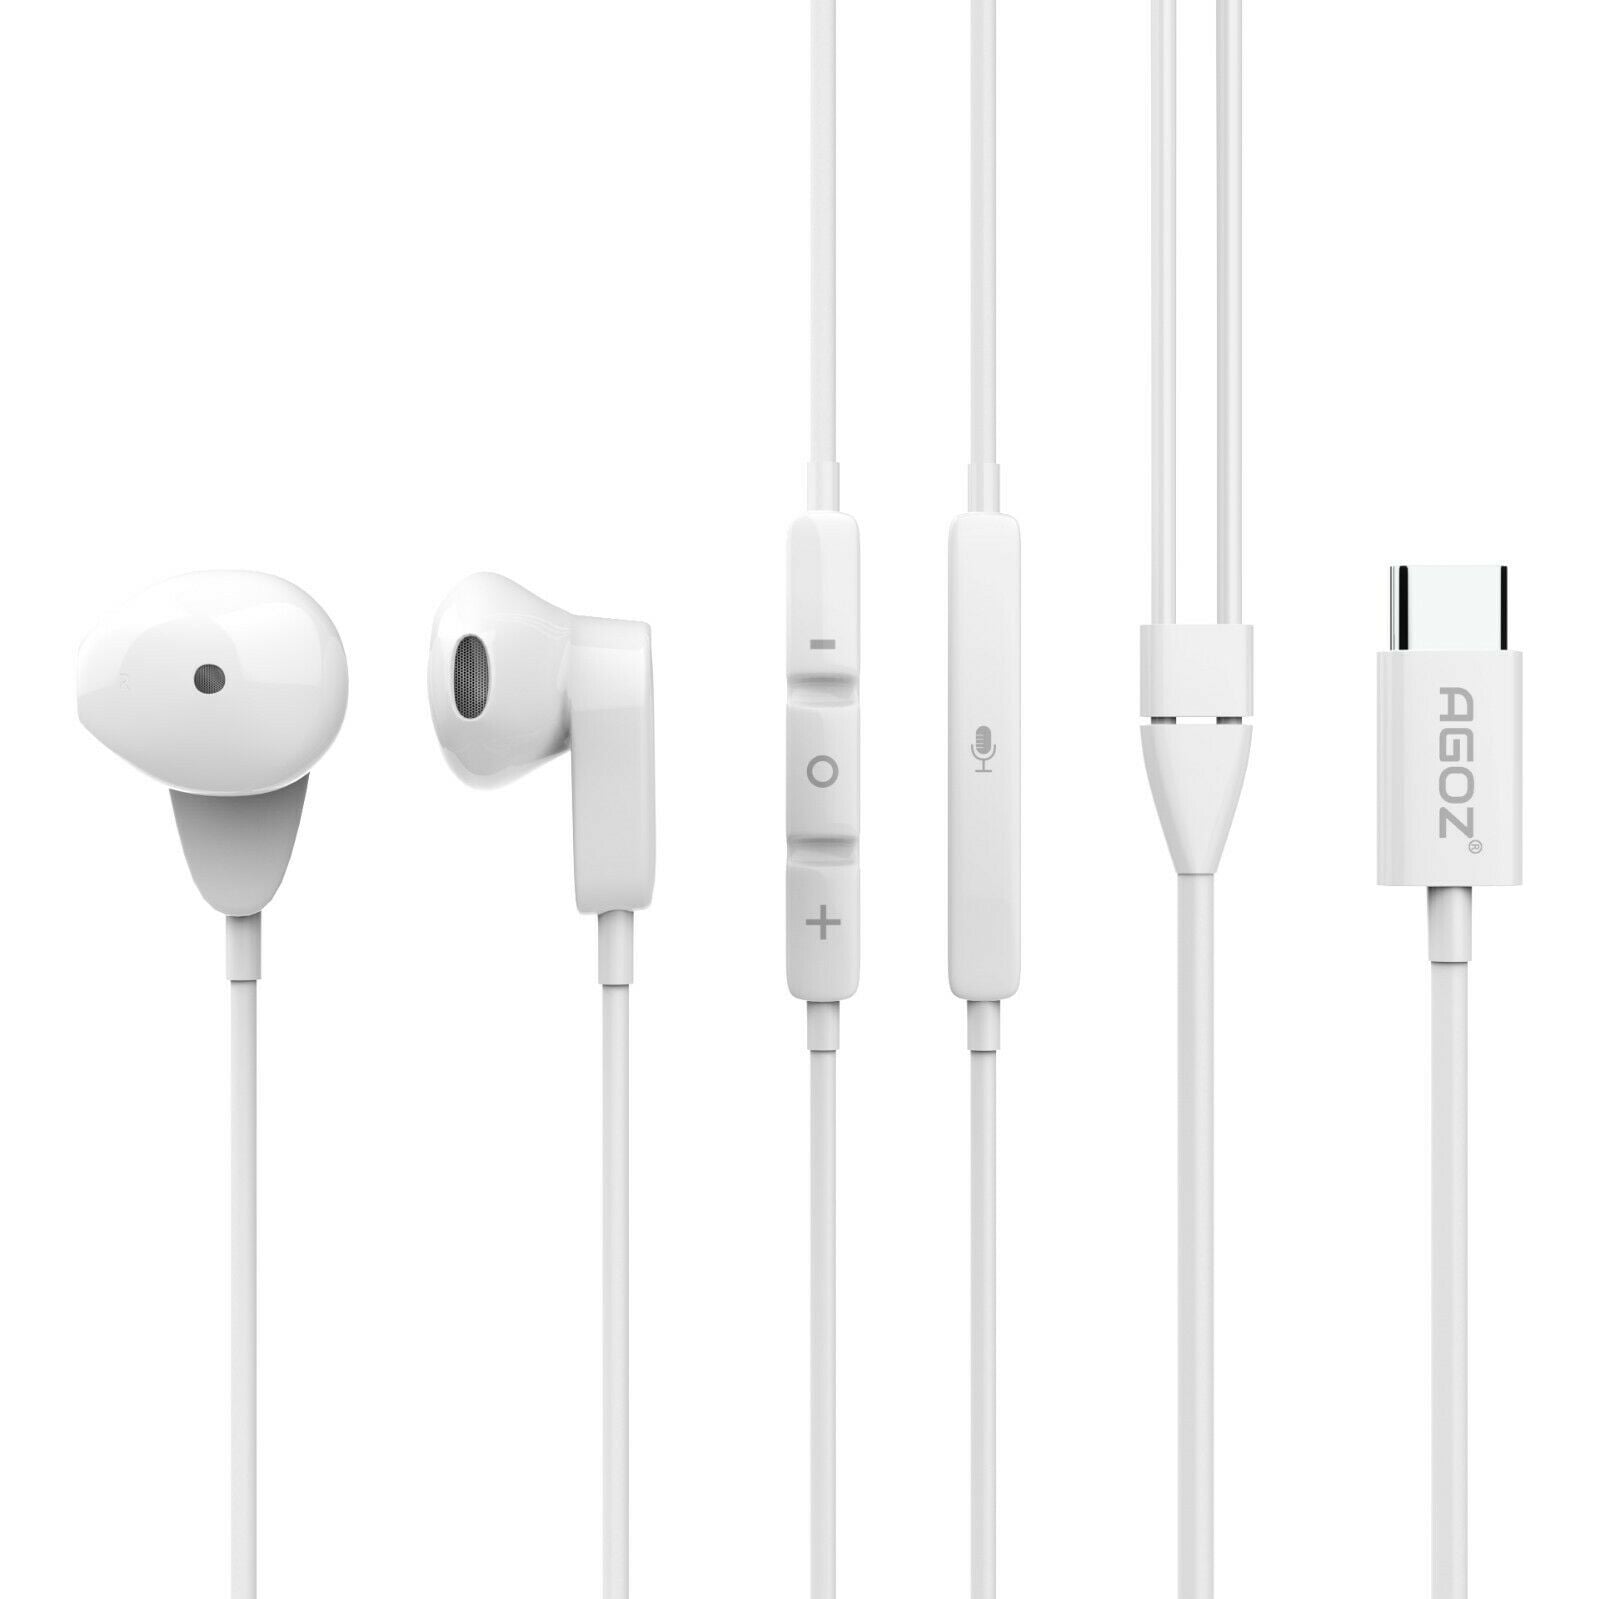 USB Type C Earbud Headphones, Wired in-Ear Stereo Noise Cancelling 